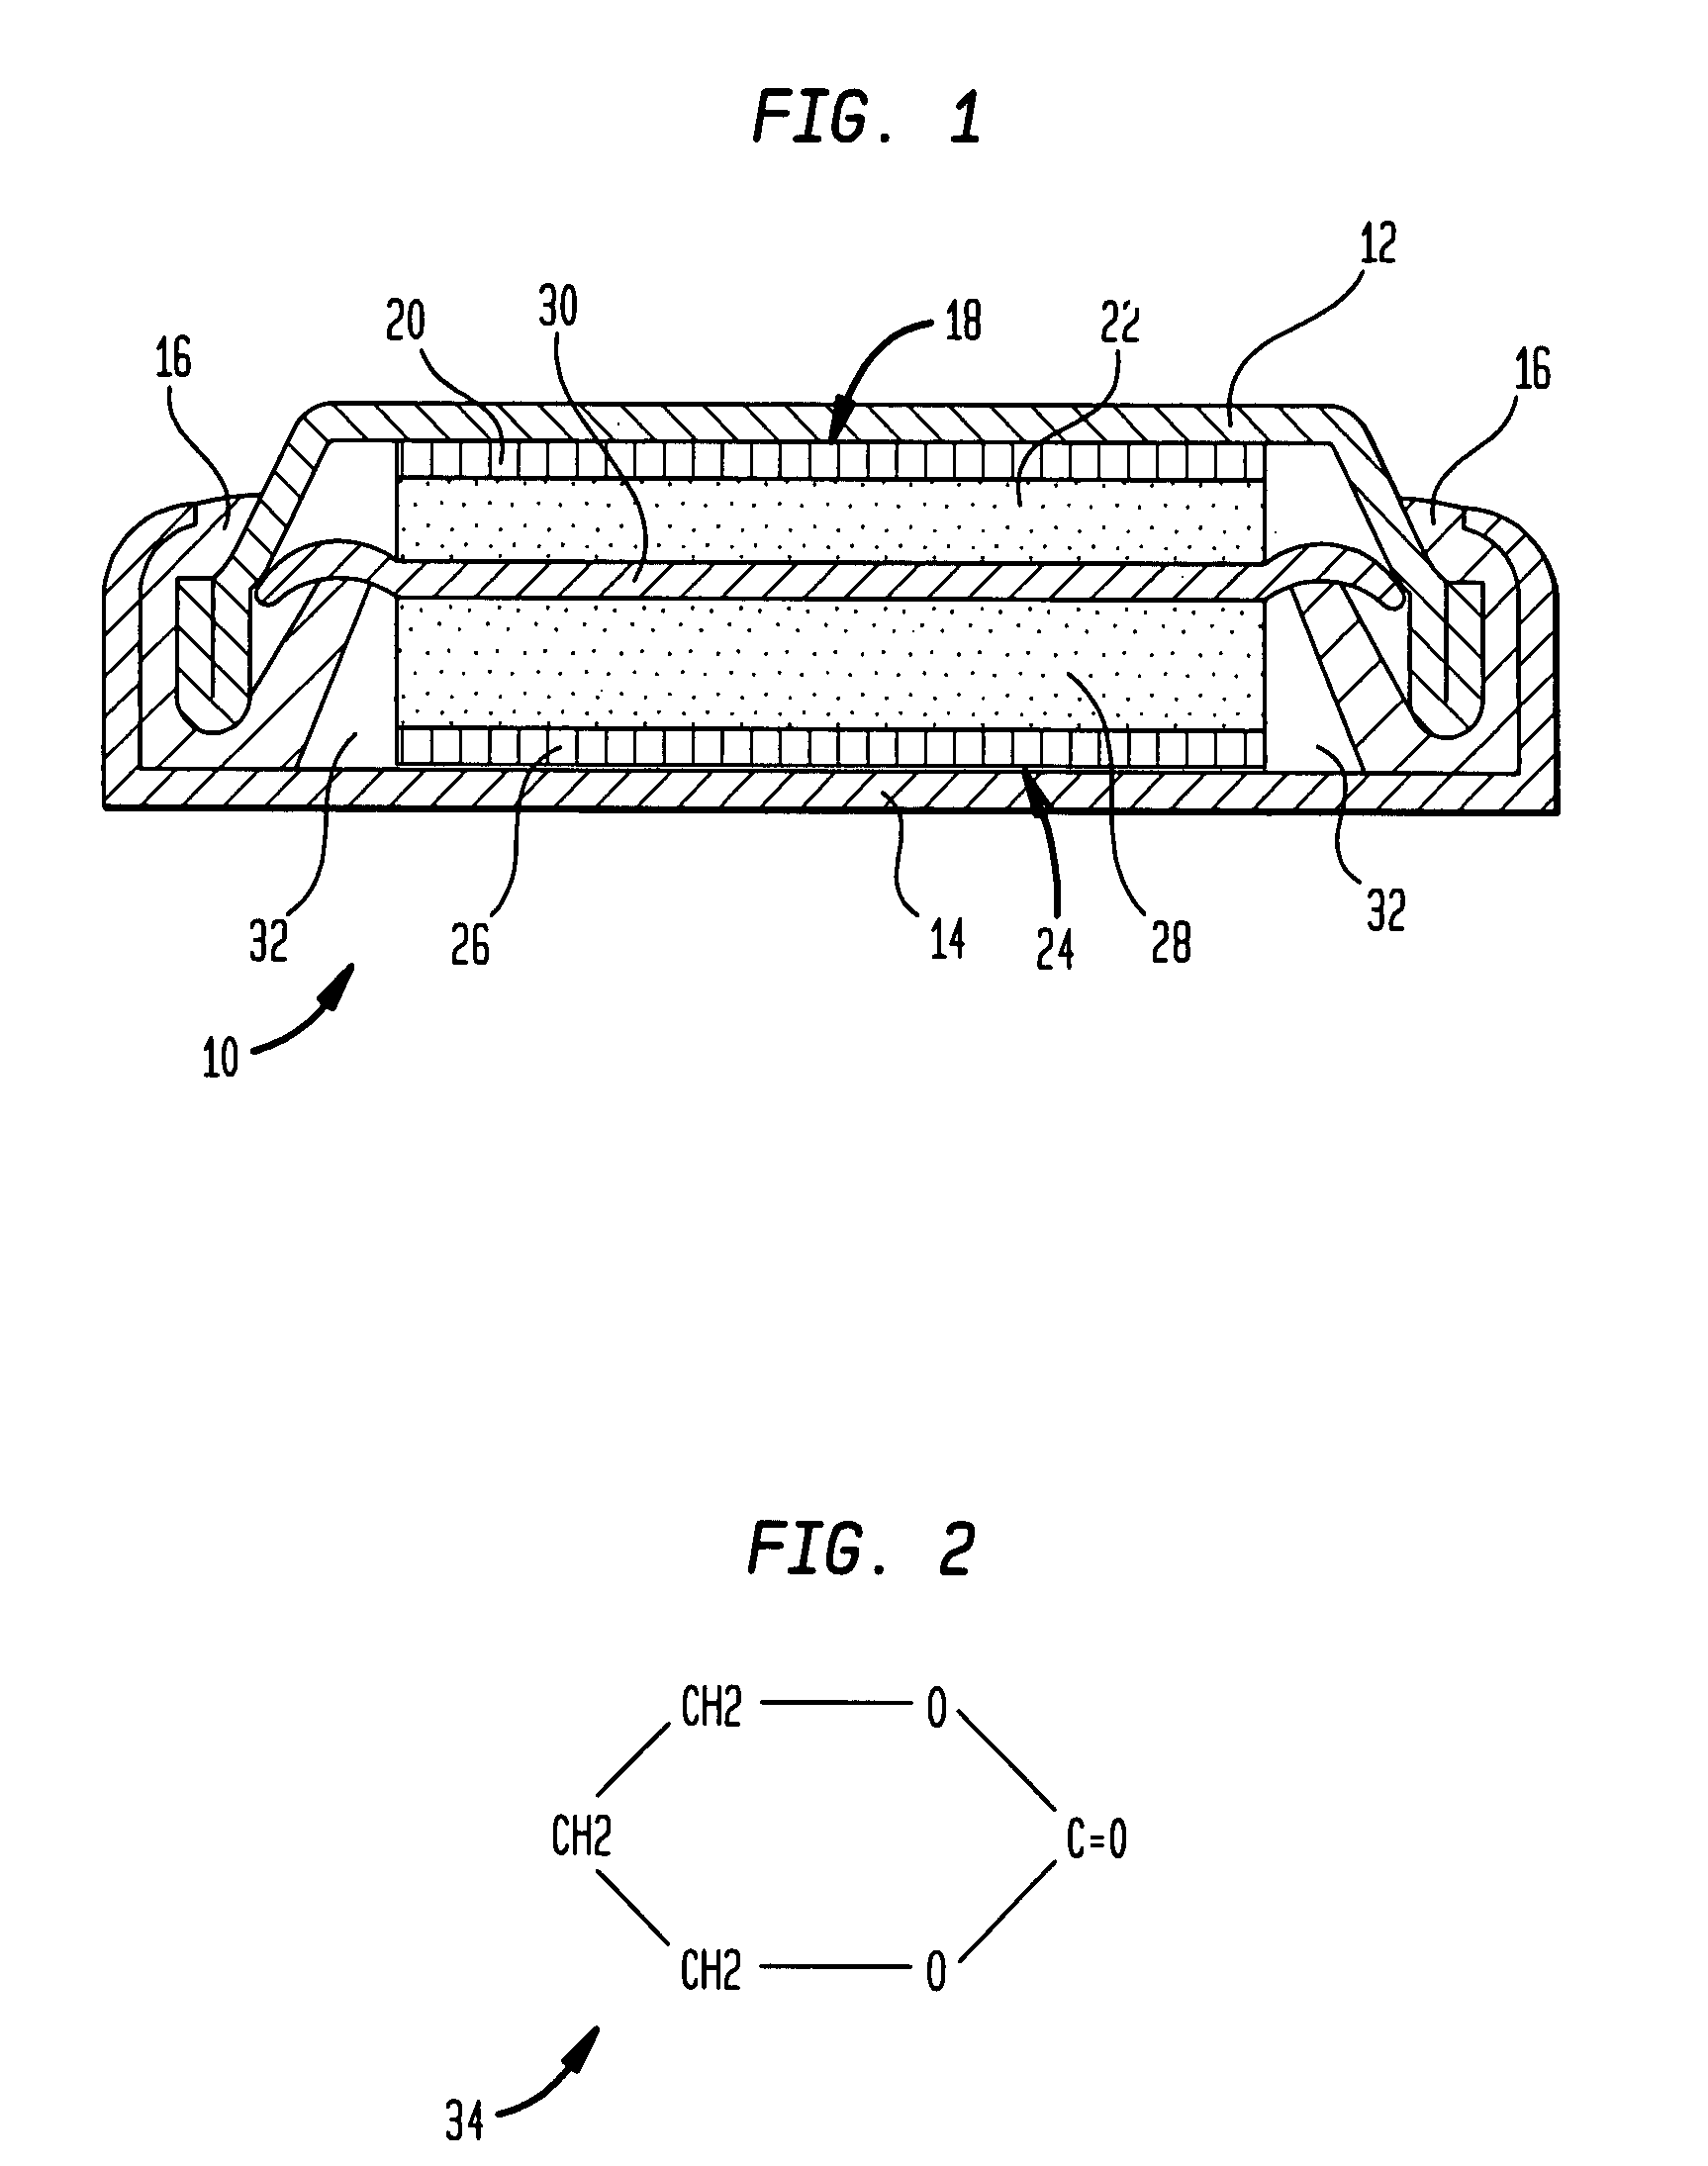 Carbonate solvent for electrolytes in lithium and lithium ion cells